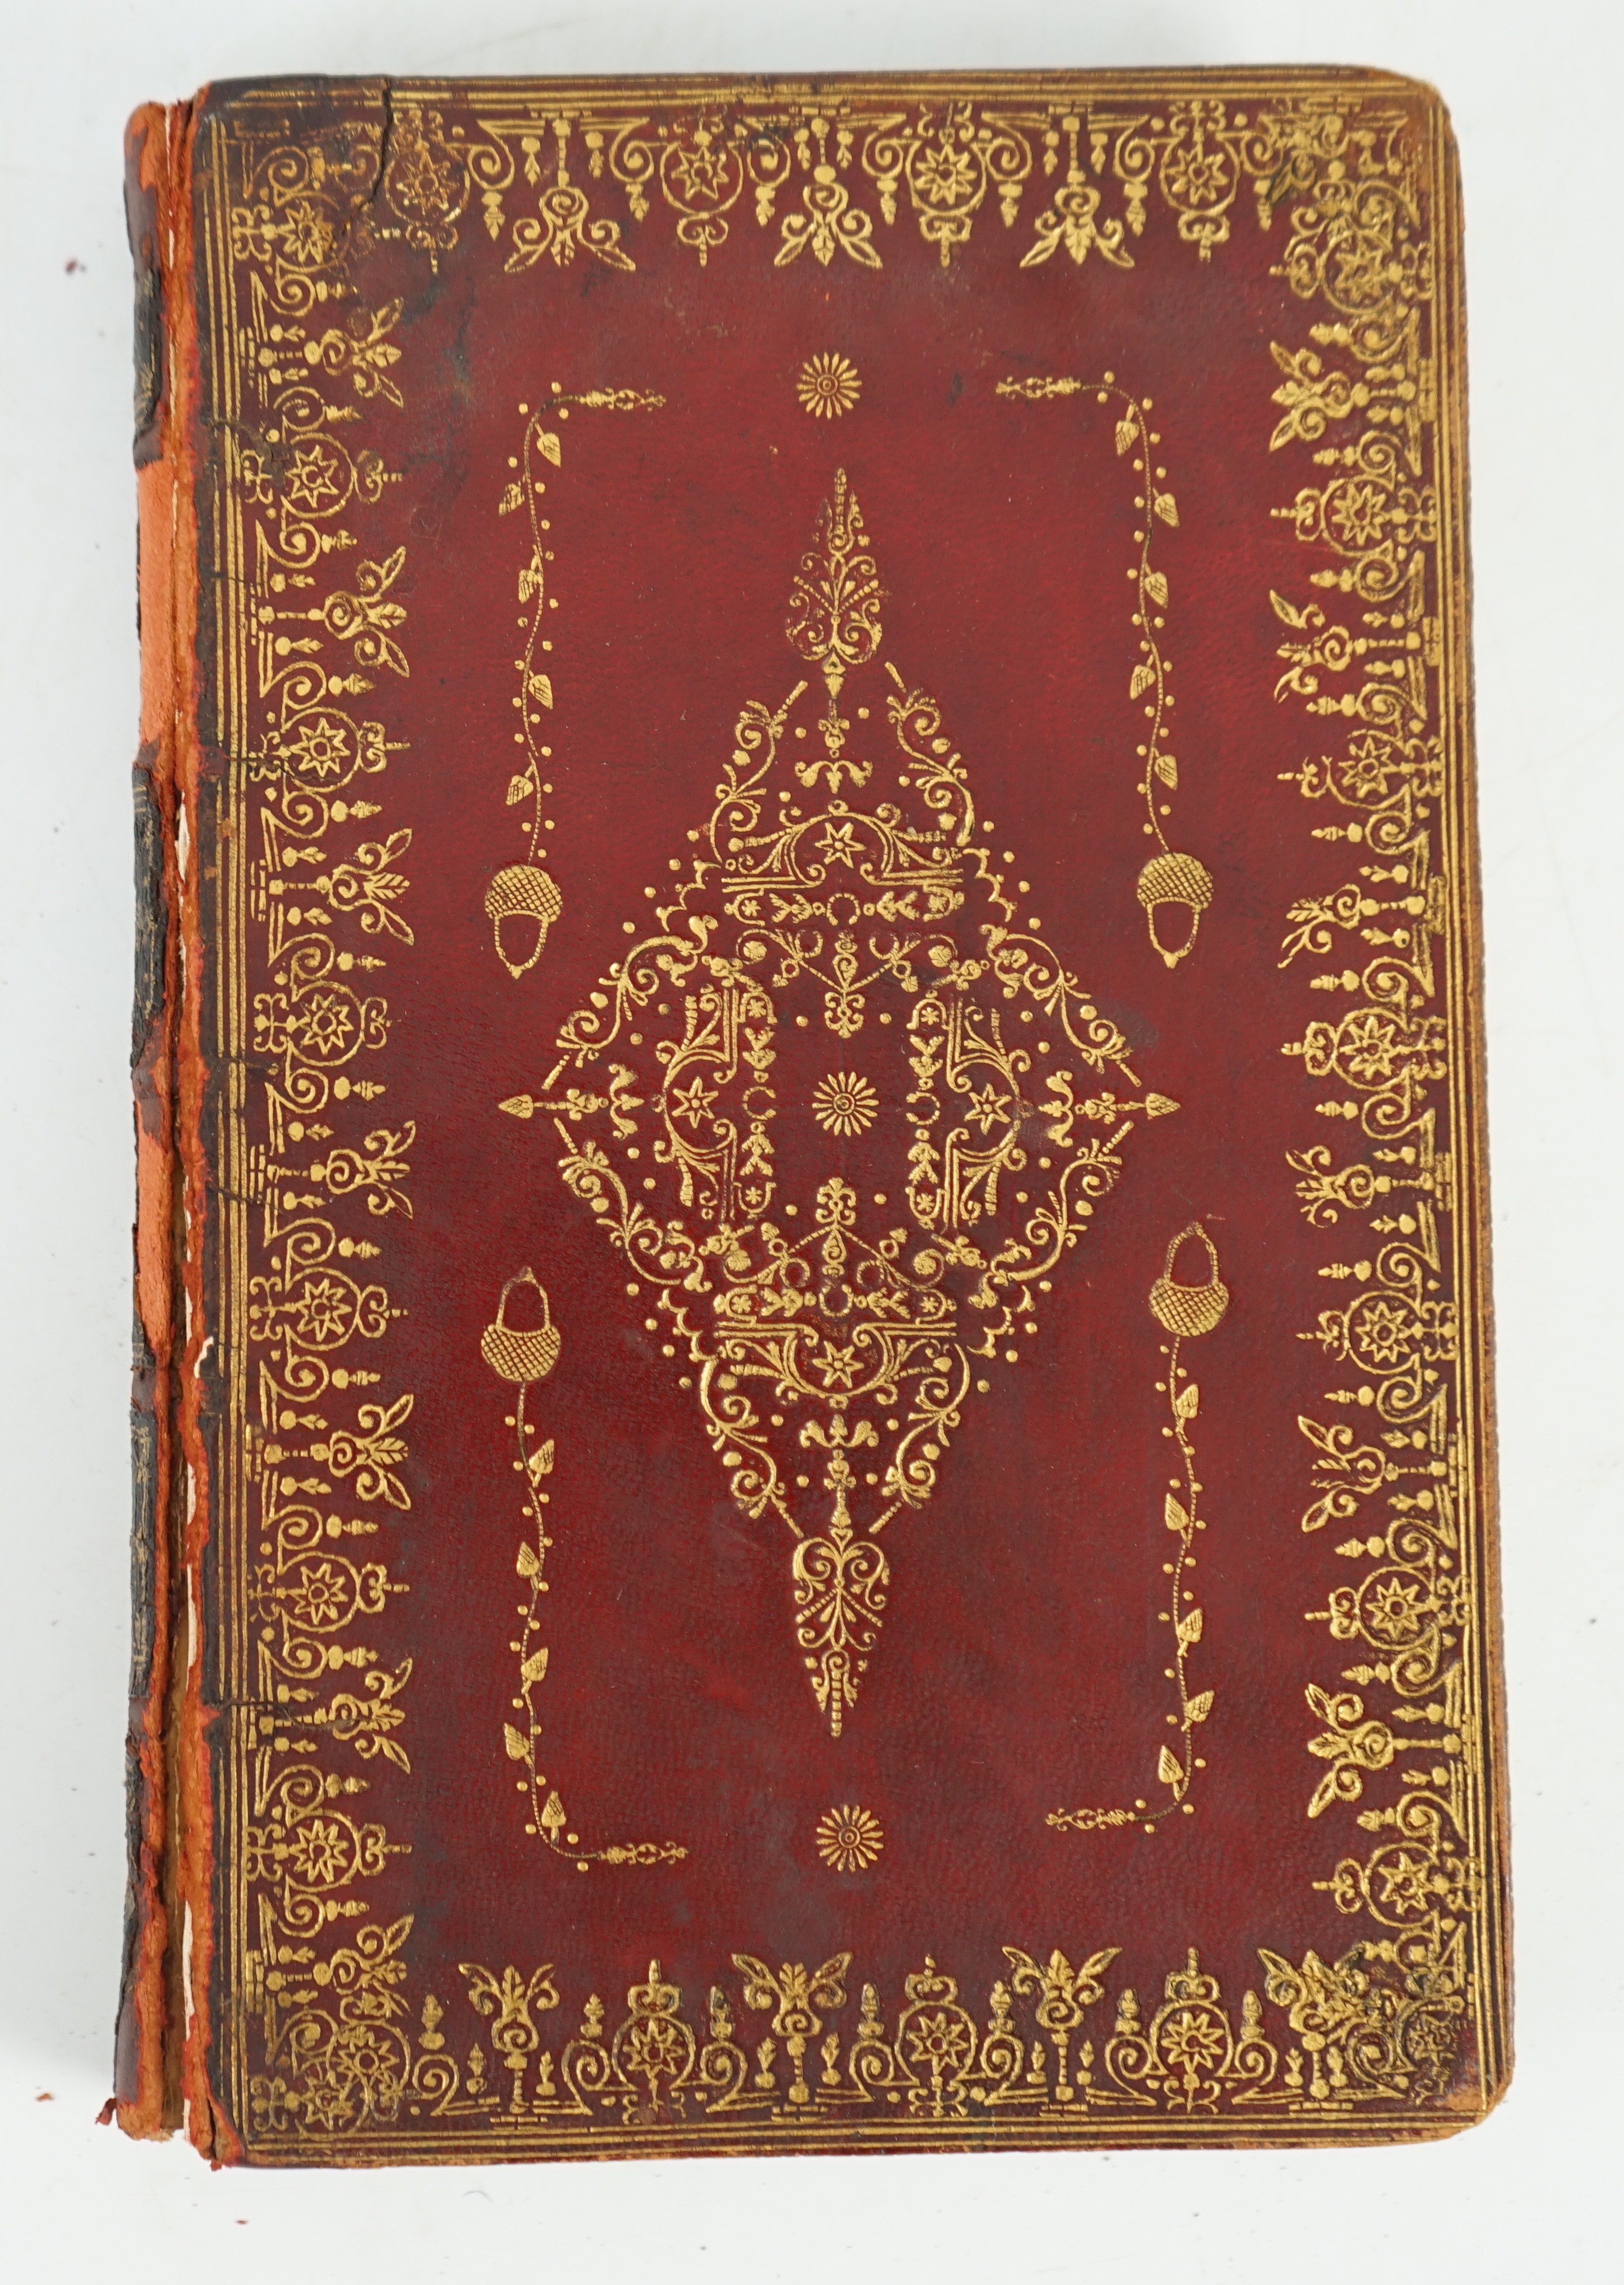 Book of Common Prayer and Administration of the Sacraments - Experimental edition, 8vo, red morocco, panel gilt embossed with lozenge devices and acorns, engraved title, portraits, volvelle to title verso, and vignette p